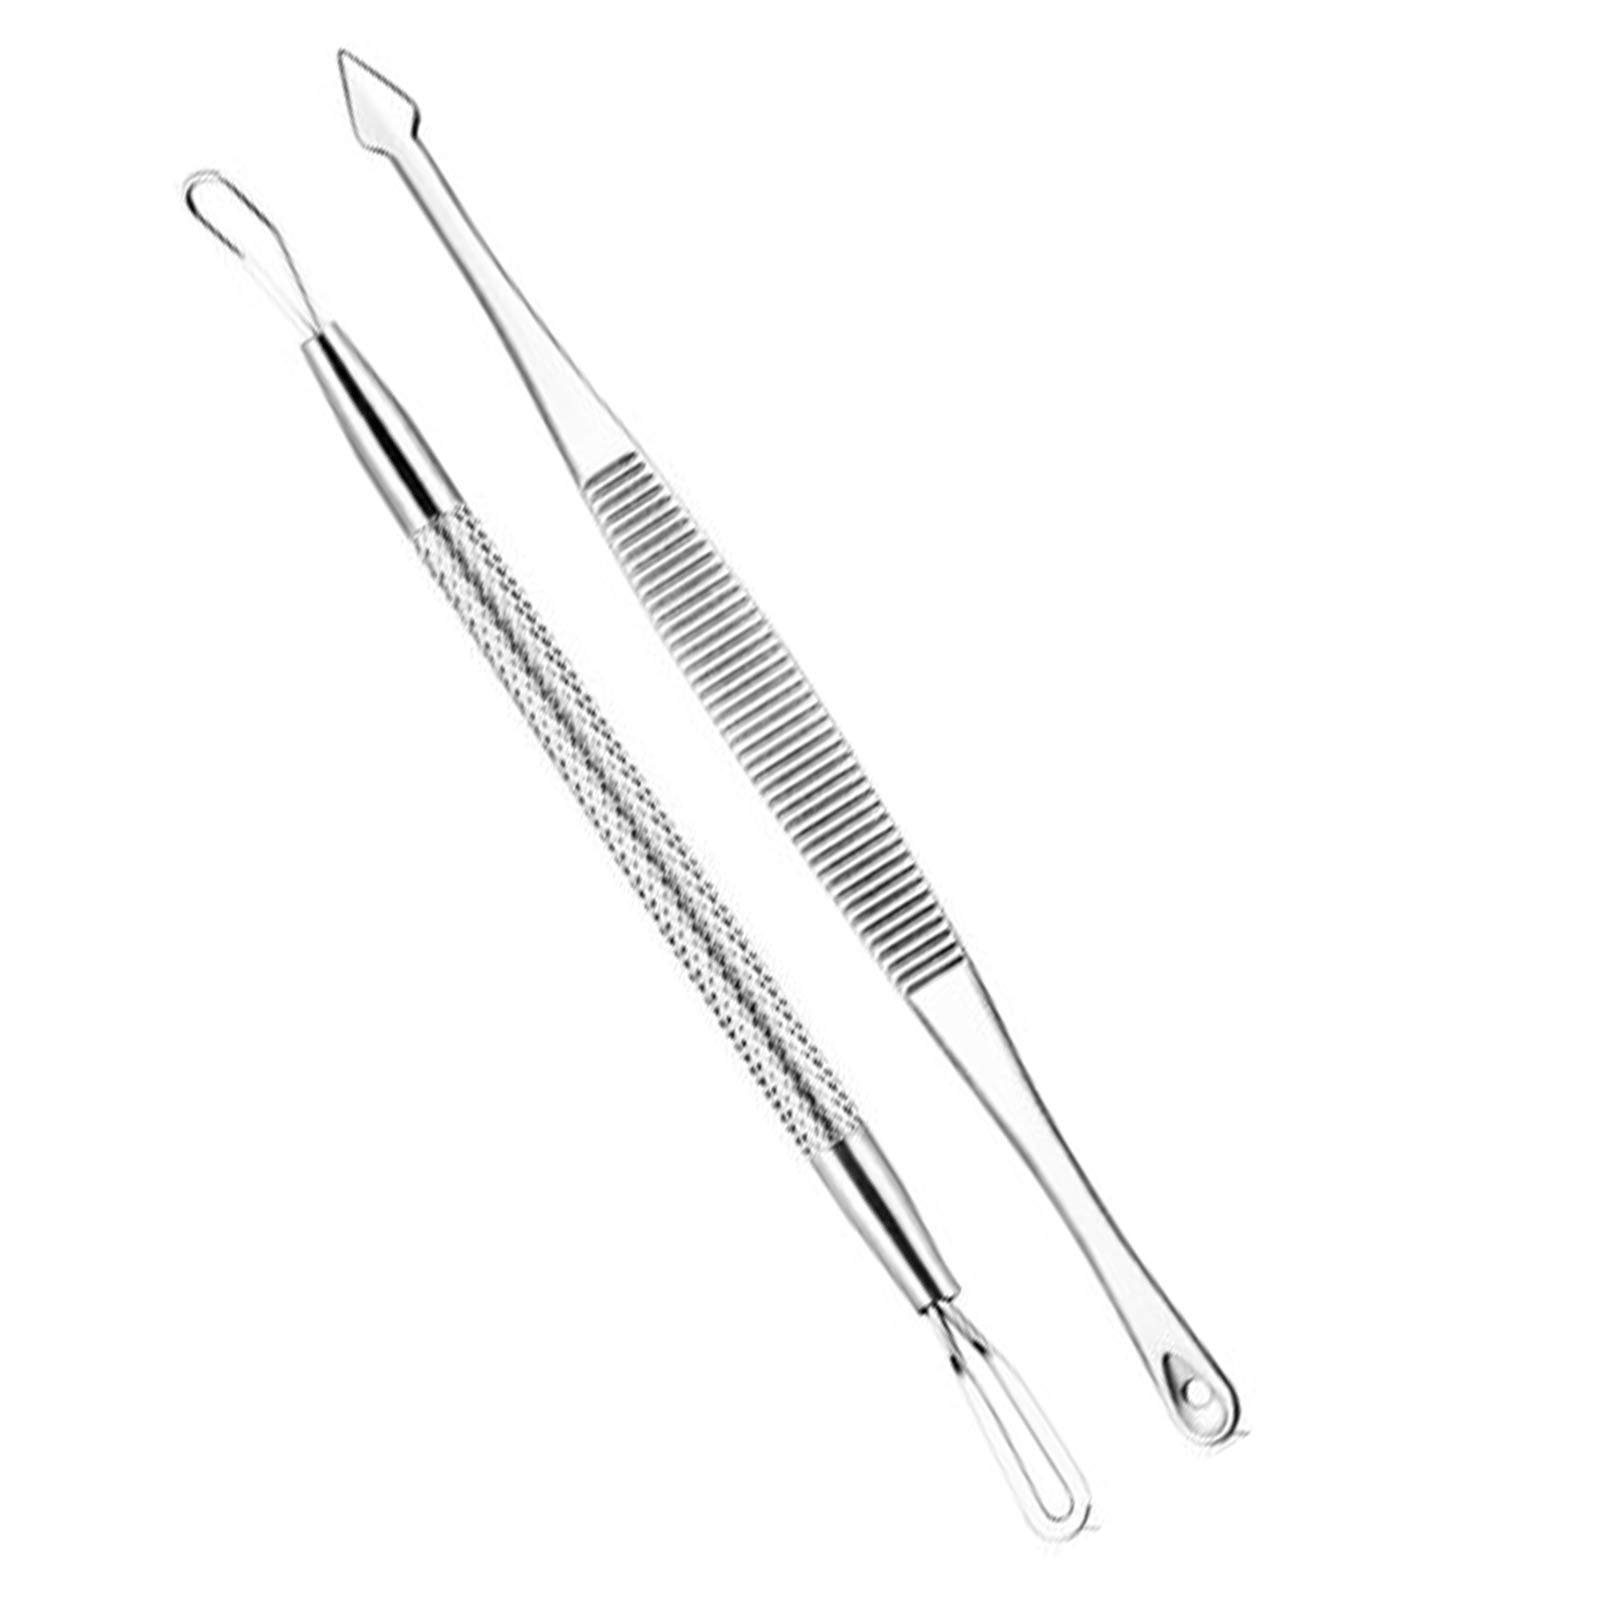 Blackhead Remover Pimple Popper Tools 2 PC Set Krisp Beauty Acne Comedone  Zit Extractor Remover Kit for Nose Facial Pore Face Blemish Whitehead  Popping Extraction Stainless Steel